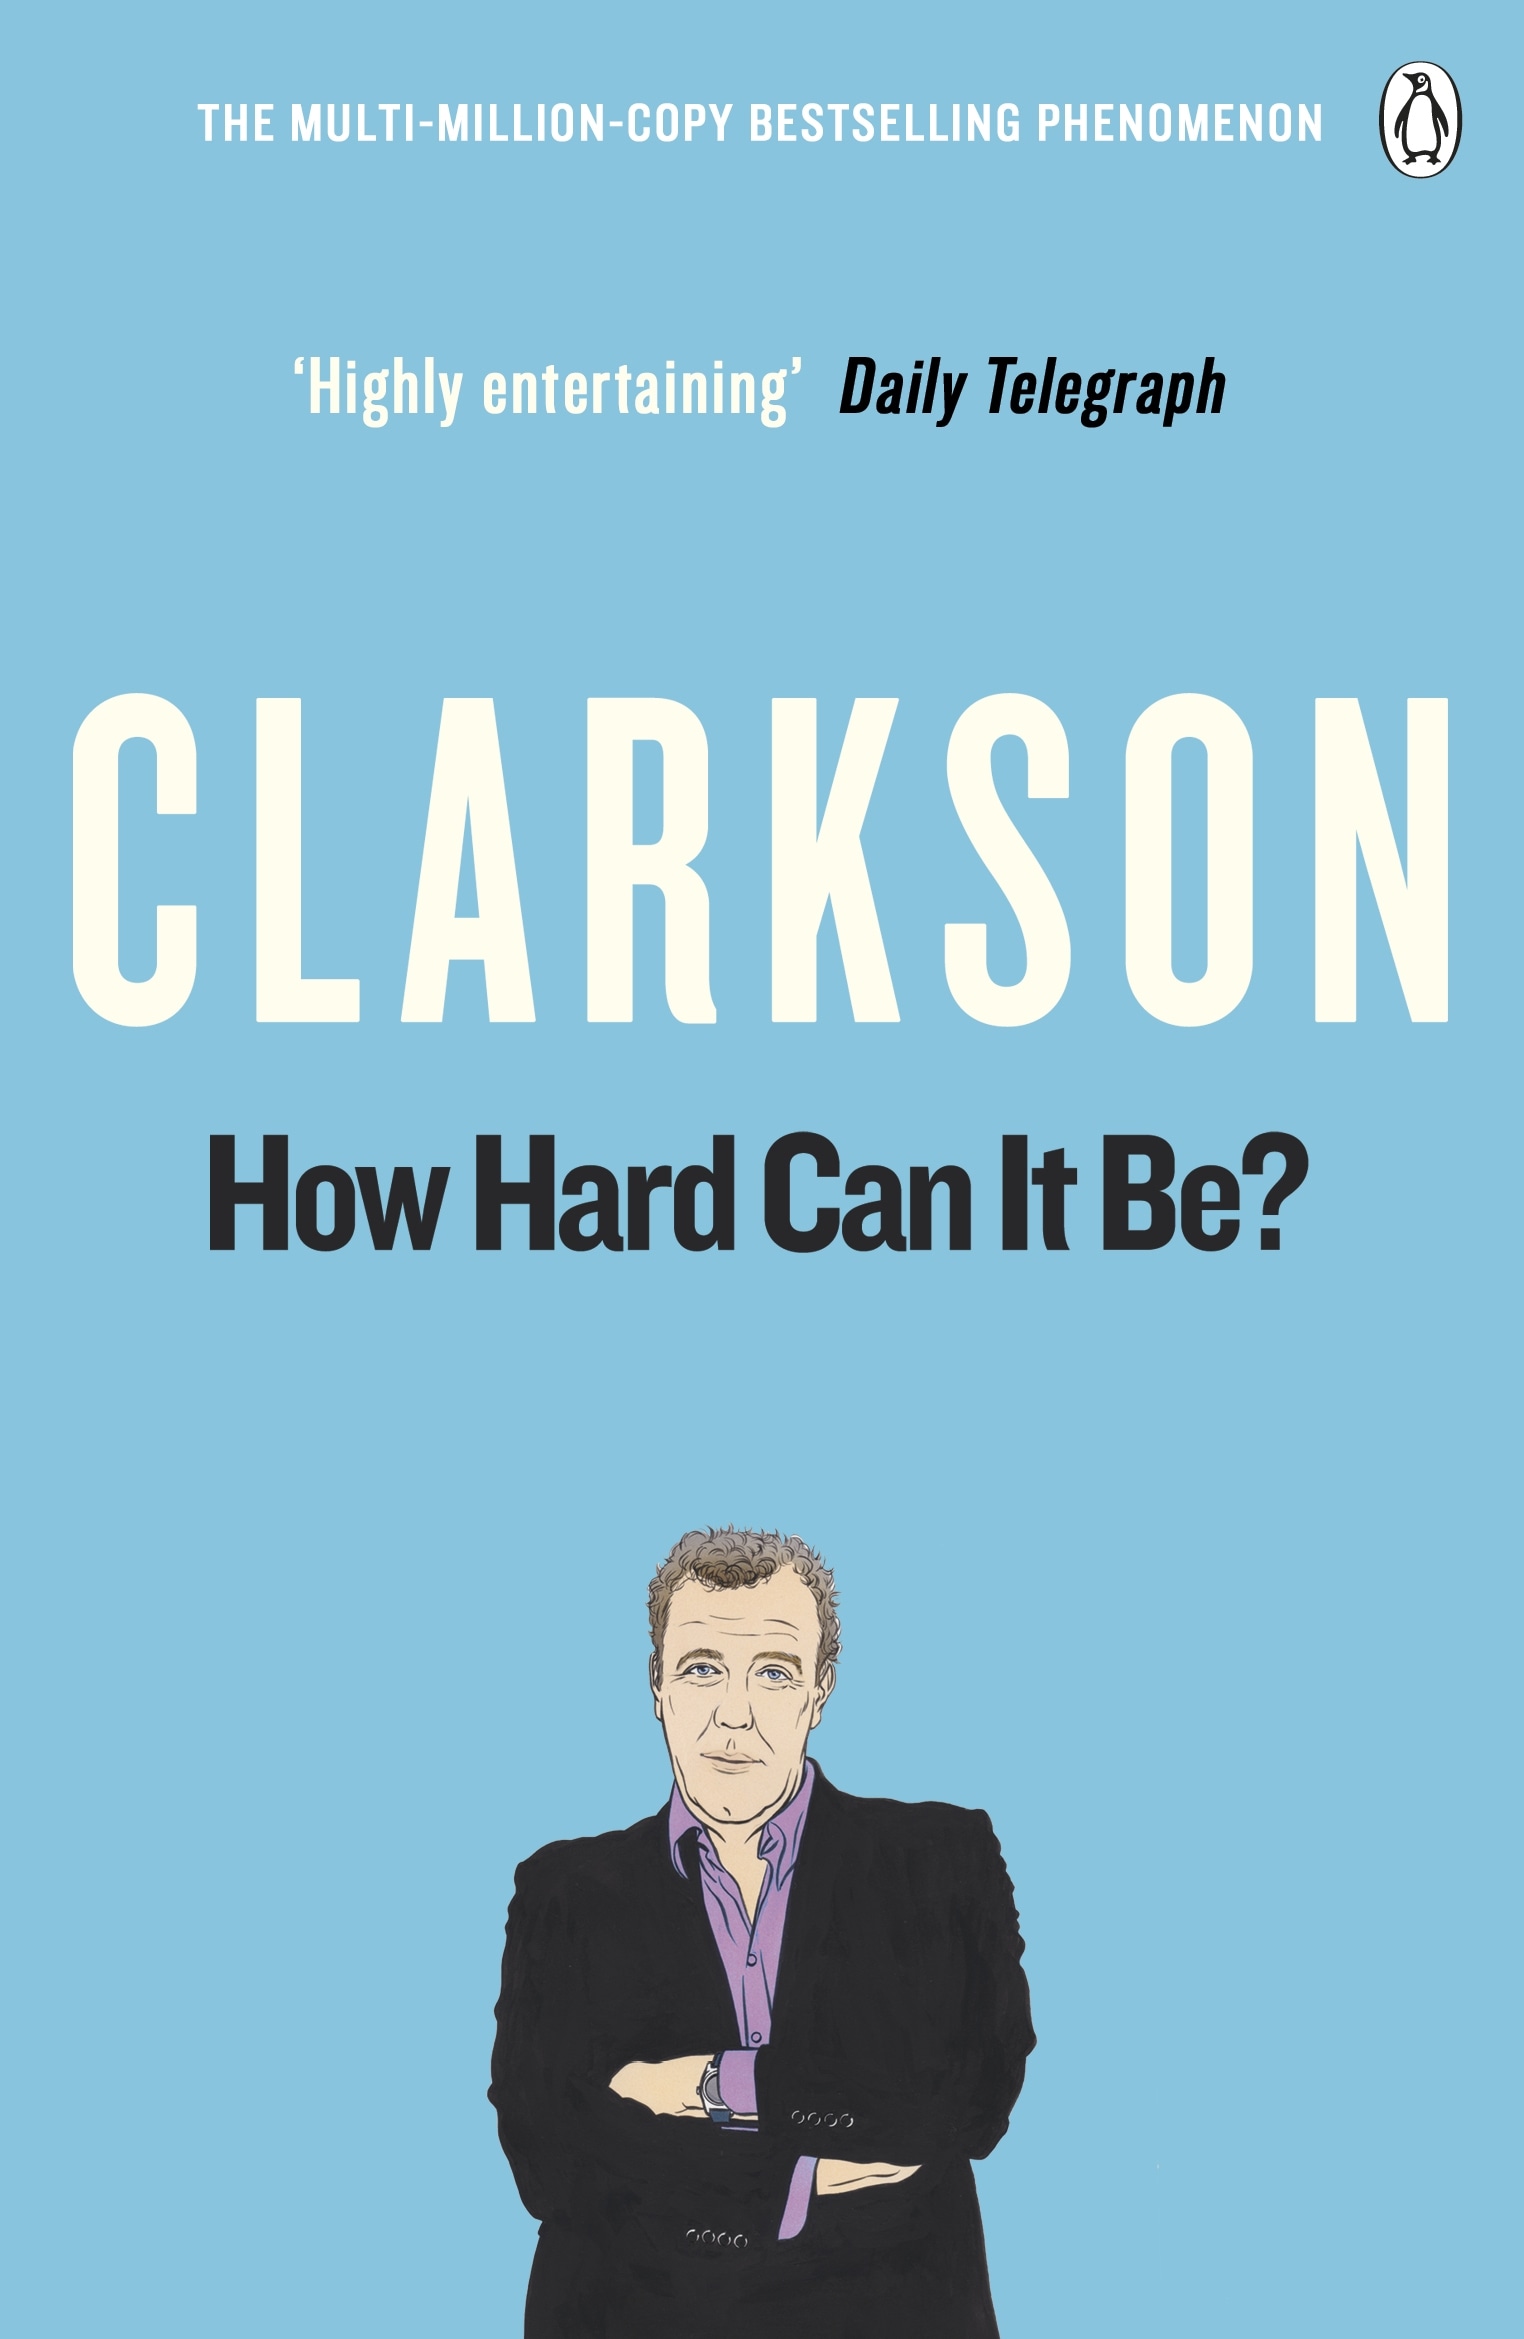 Book “How Hard Can It Be?” by Jeremy Clarkson — May 26, 2011